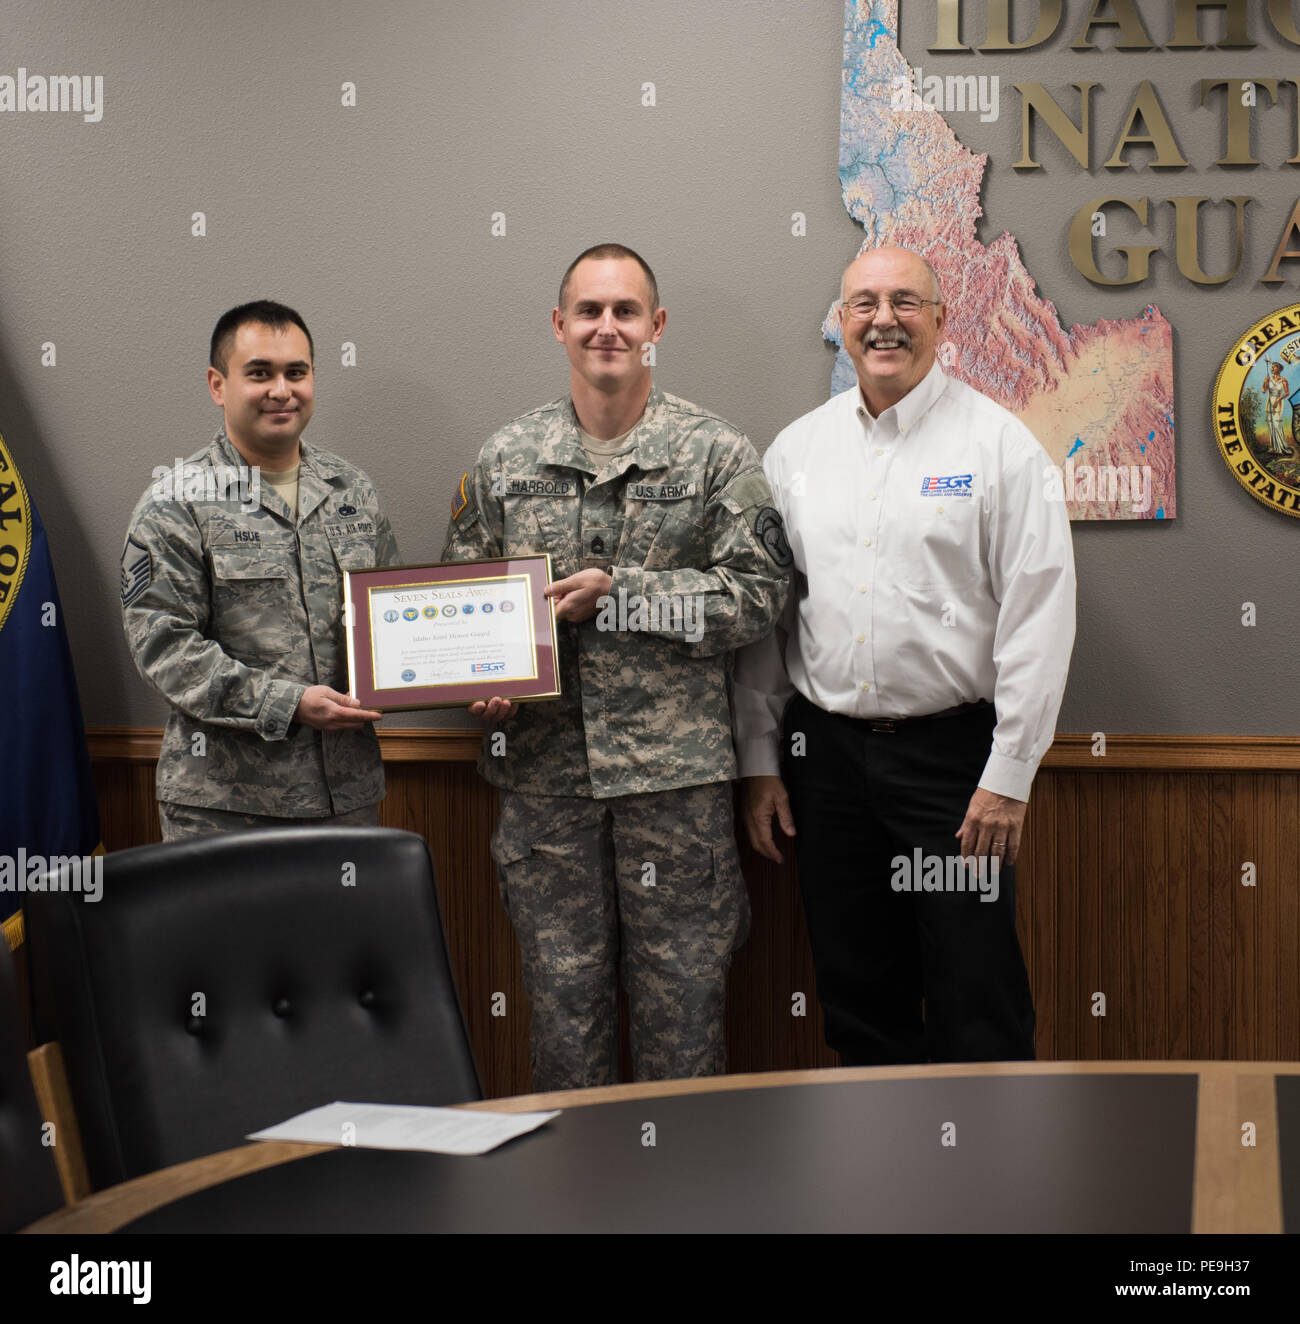 Bruce Wright, state chair of the Idaho Employer Support of the Guard and Reserve (ESGR), presents an award to Master Sgt. Carlos Hsue and Sgt. 1st Class Bou Harrold for their support as Joint Honor Guard at Gowen Field, Boise, Idaho, Nov. 19, 2015. (U.S. Air National Guard photo by Tech. Sgt. John Winn/Released) Stock Photo